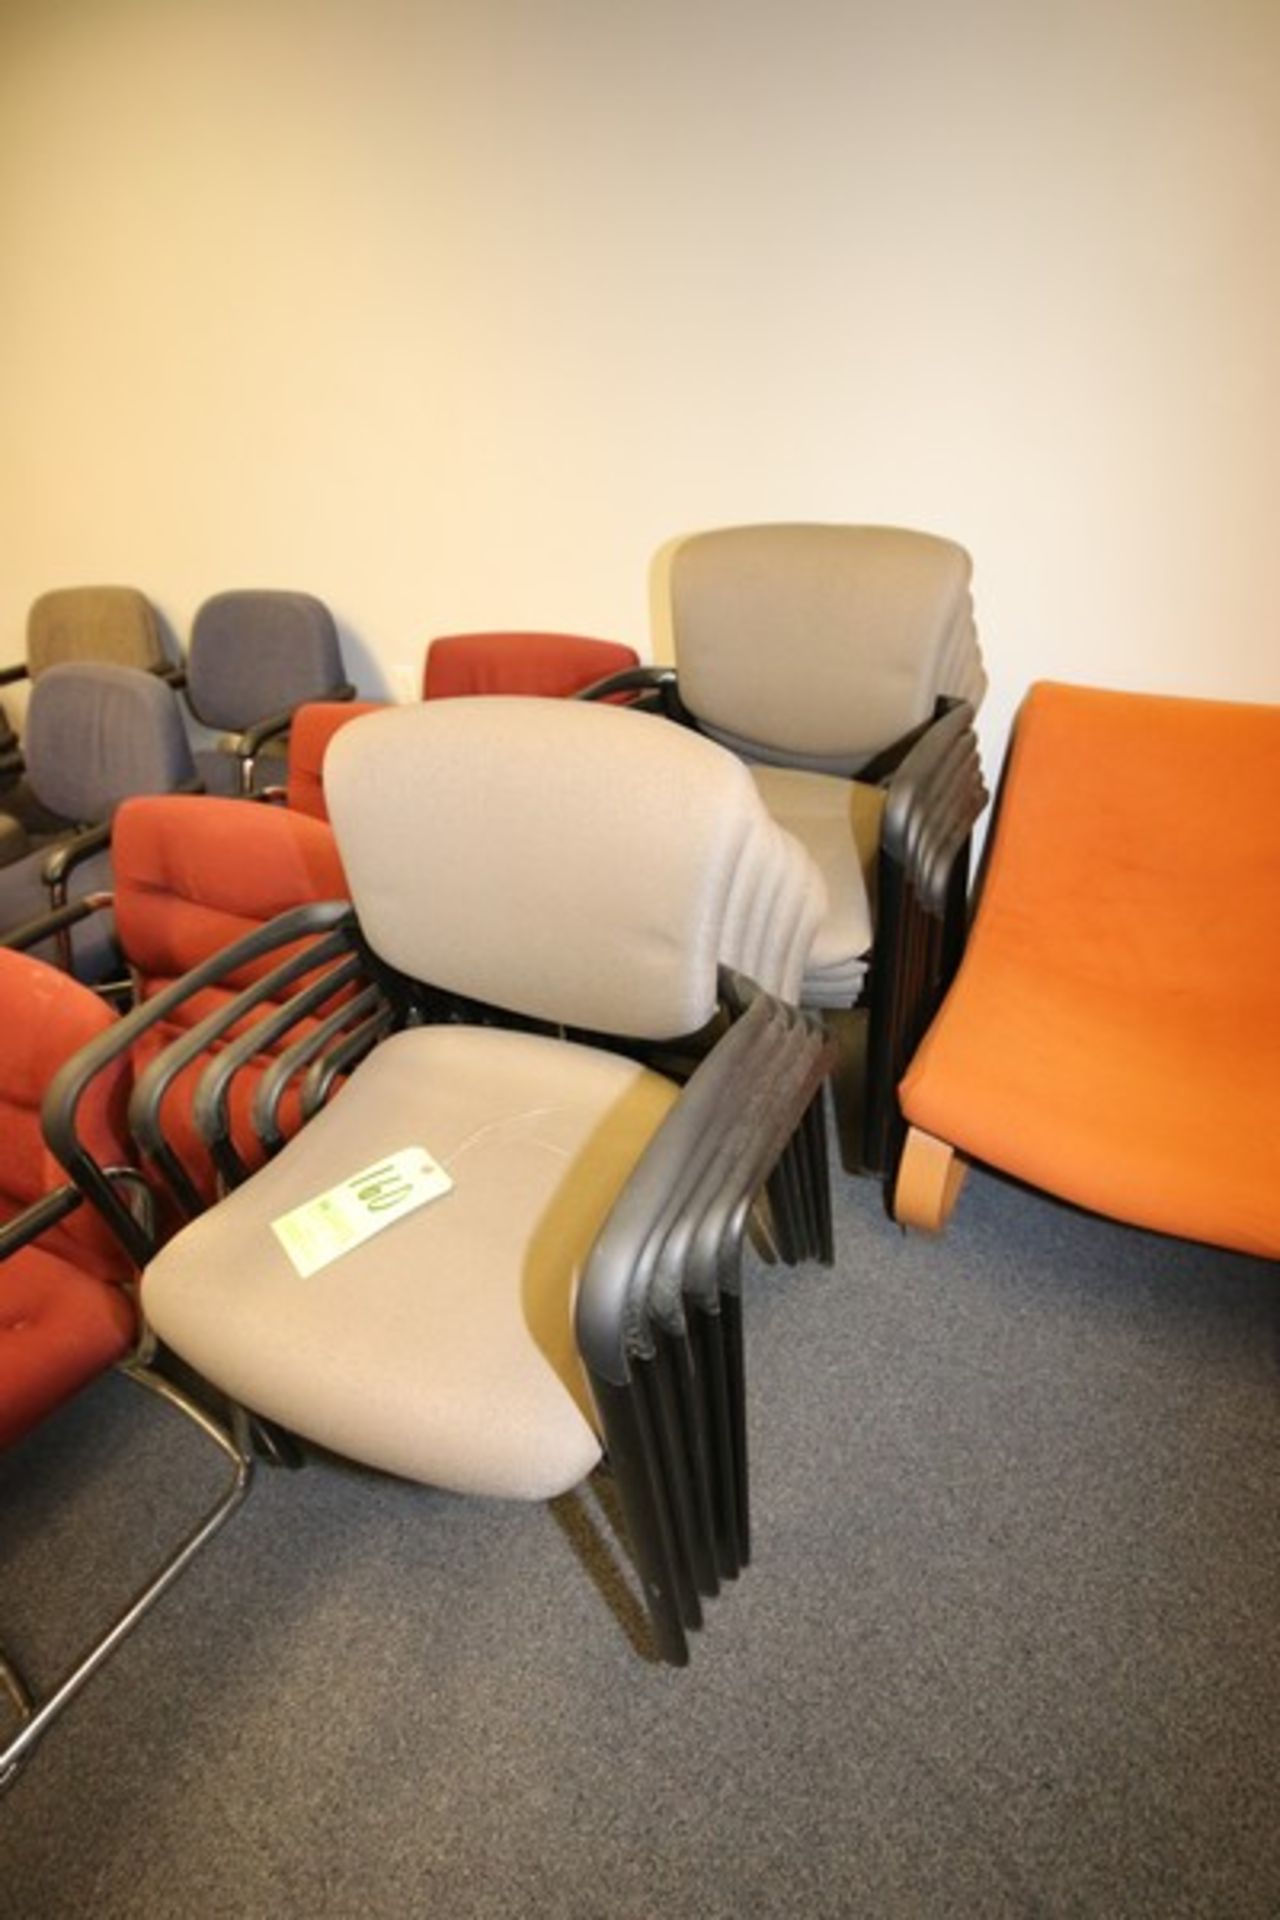 Haworth Improv Side Chairs - Stackable chairs that are perfectly at home in reception and teaming - Image 3 of 3